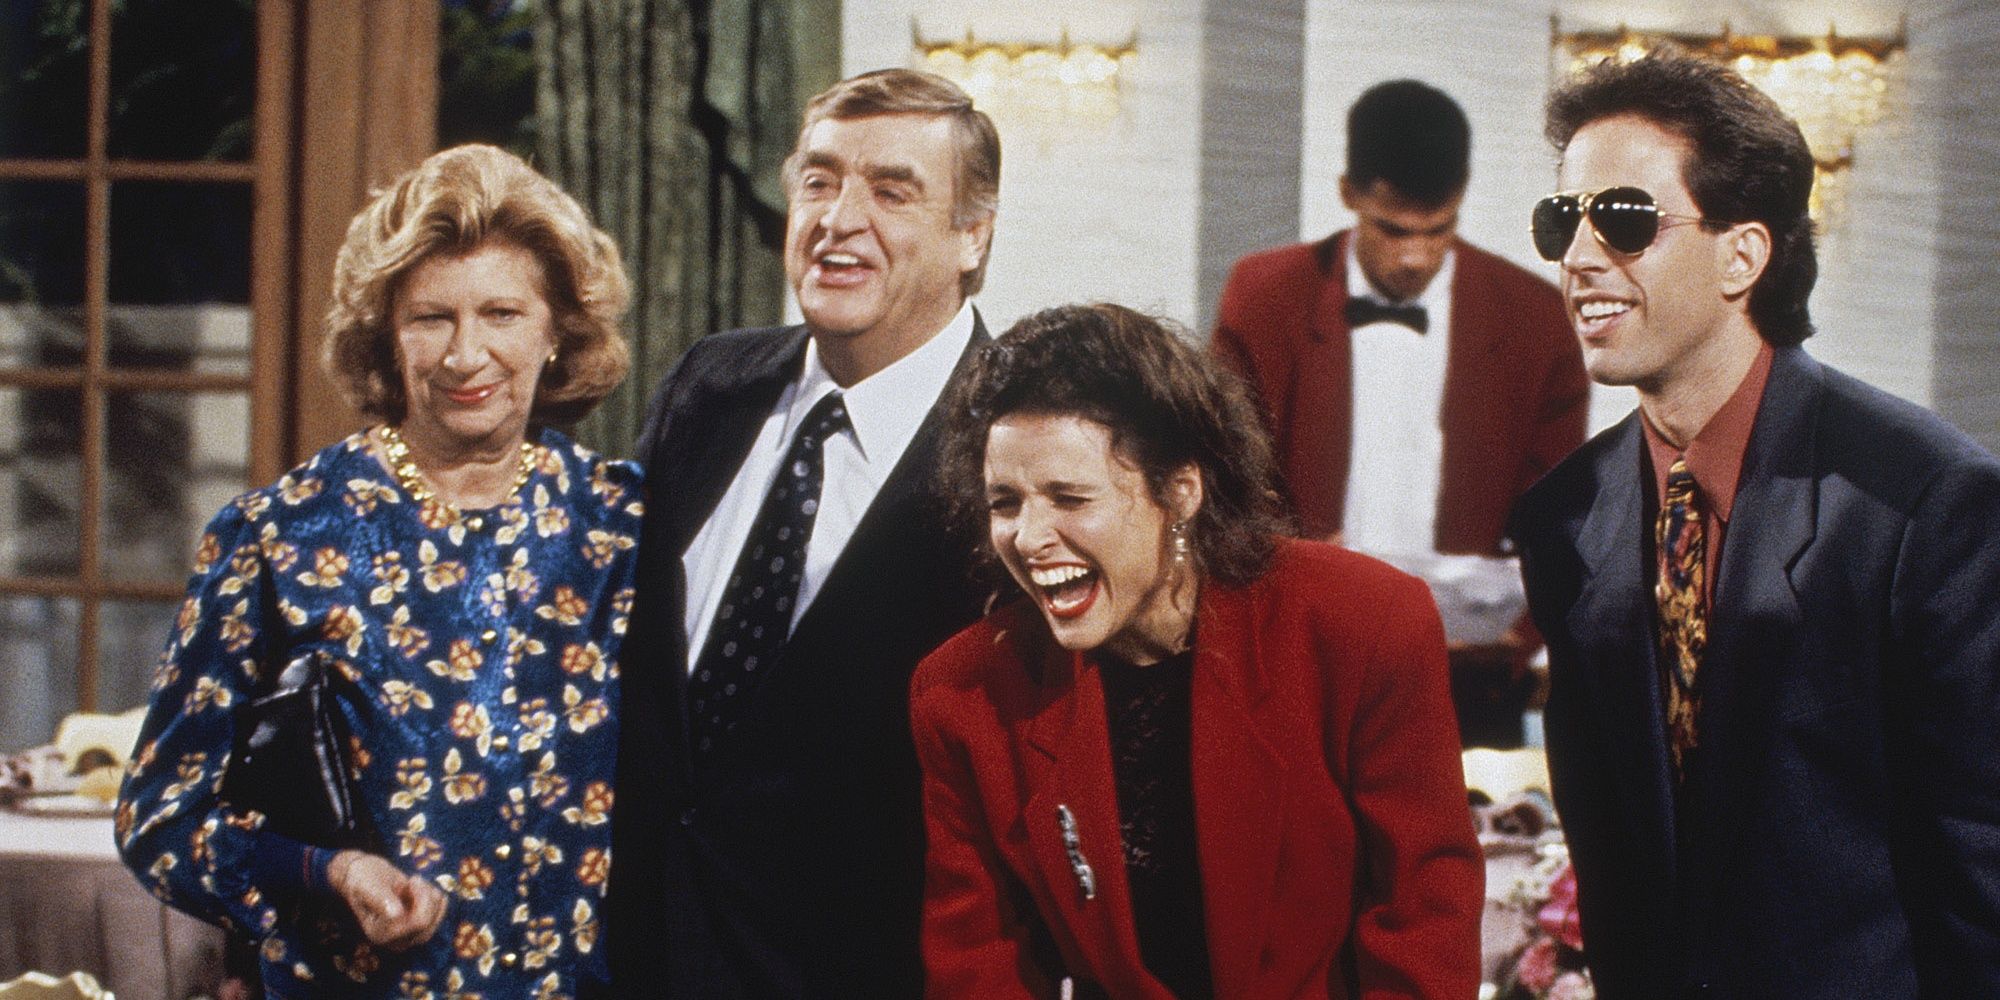 Elaine laughs while on pain meds while standing with Jerry and his parents in Seinfeld